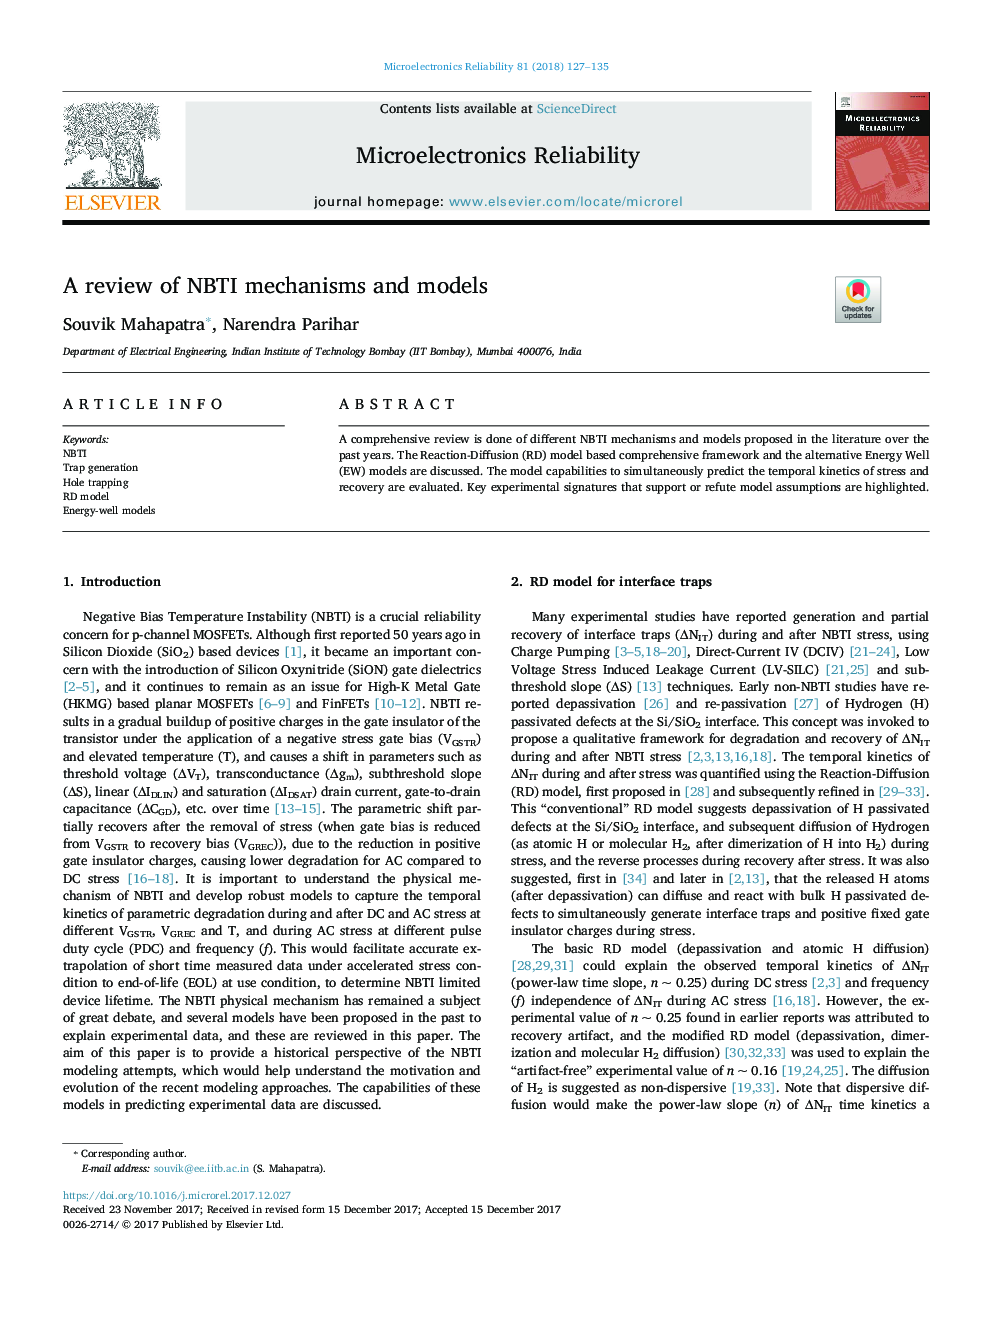 A review of NBTI mechanisms and models